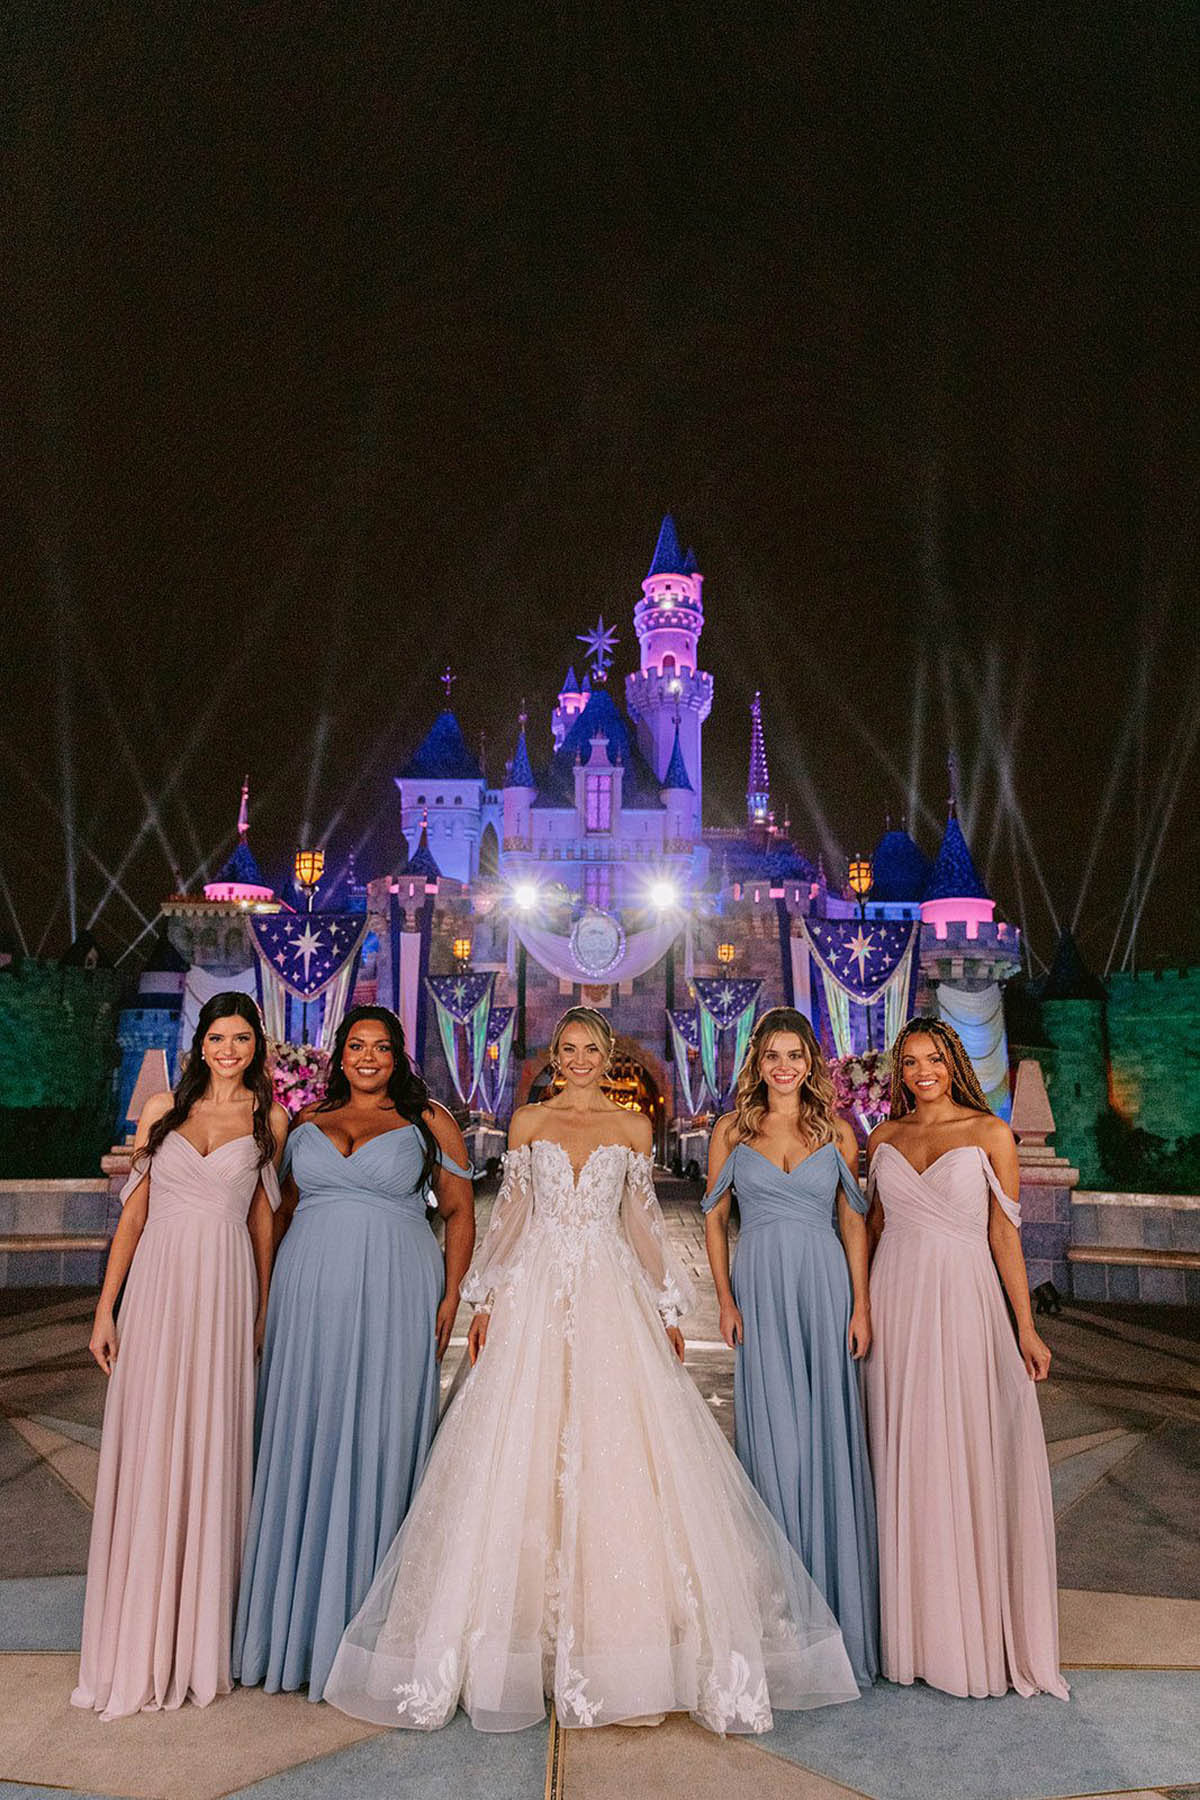 A group of people in a white gown and pink and blue wedding party dresses stand in front of Sleeping Beauty's castle.